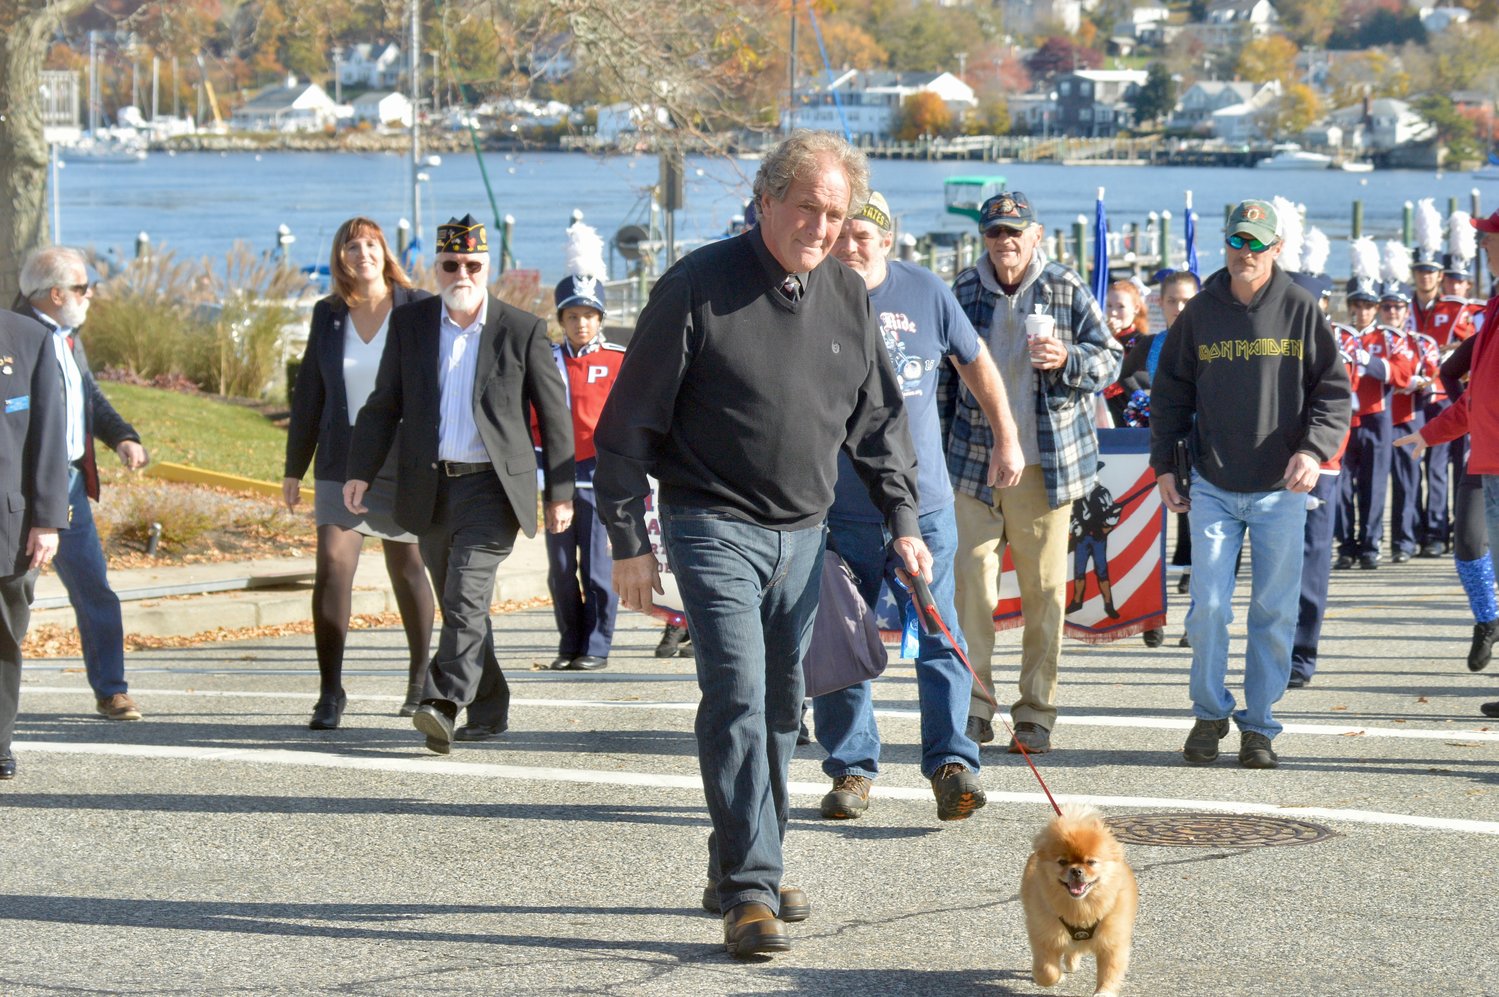 Veteran John Vitkevich — and his four-legged pal, Nicholas — lead the parade from Stone Bridge to Thriving Tree Coffee House on Park Avenue.